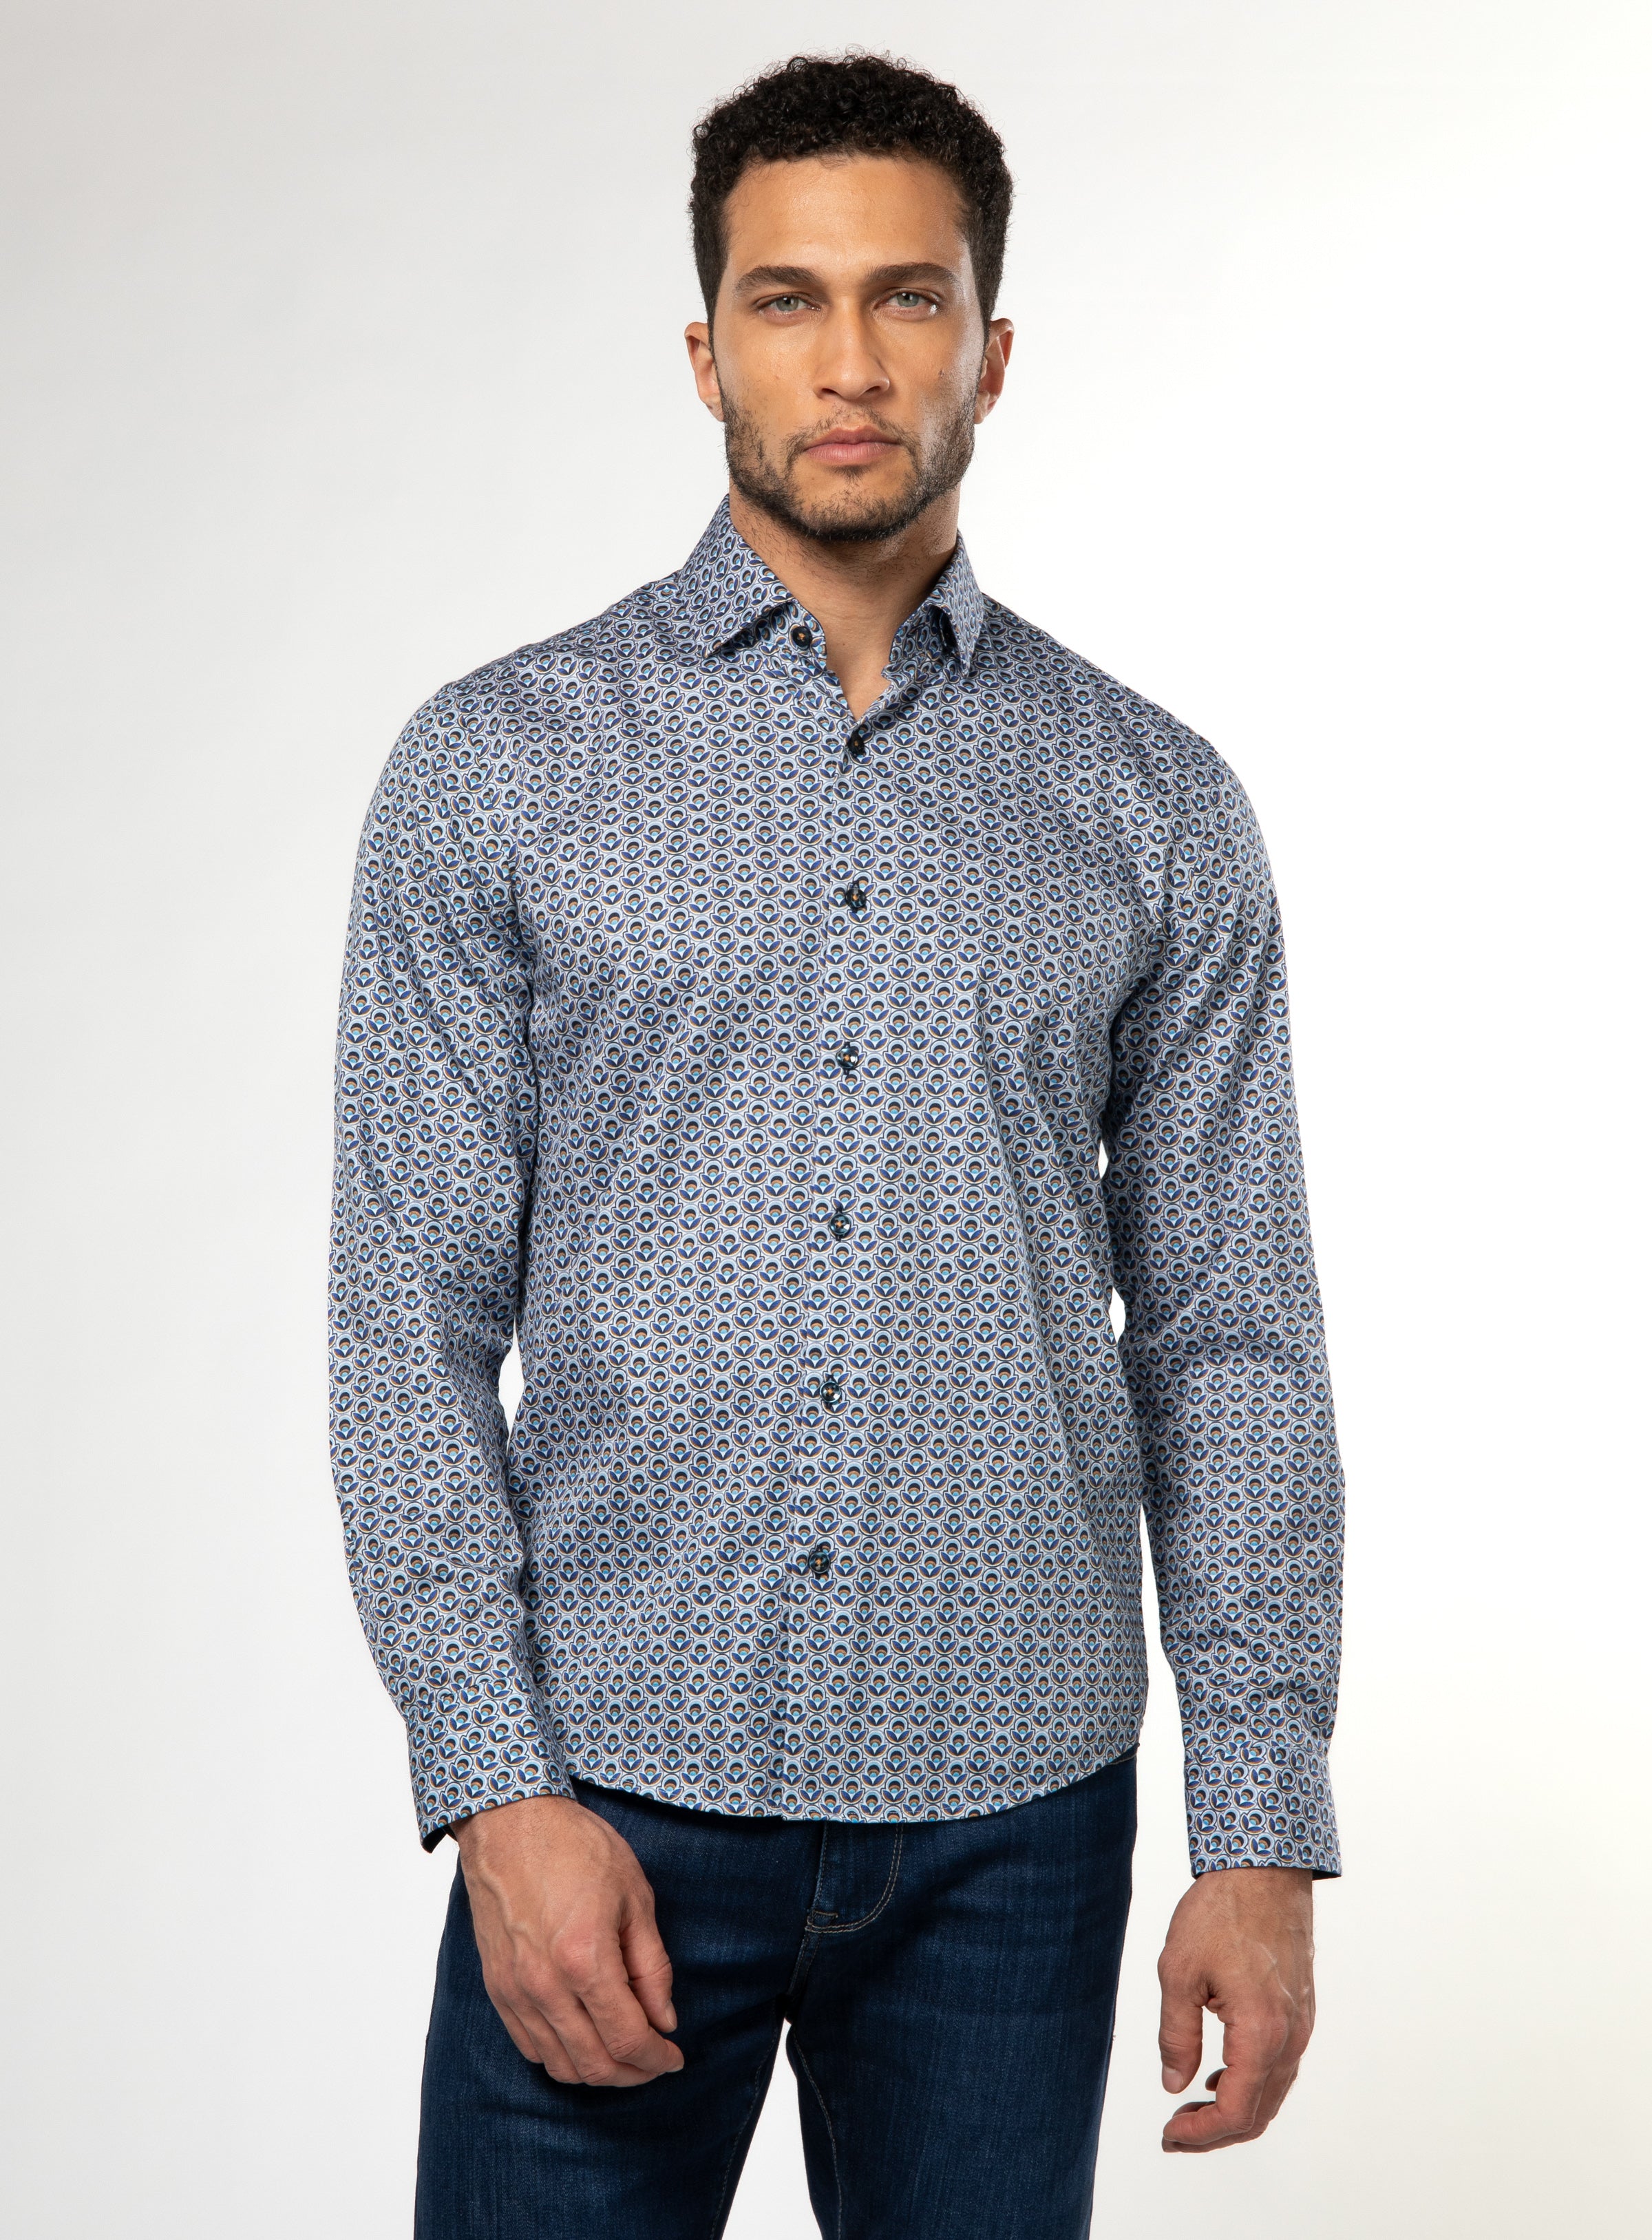 Men's Casual Shirts and Overshirts - Ernest